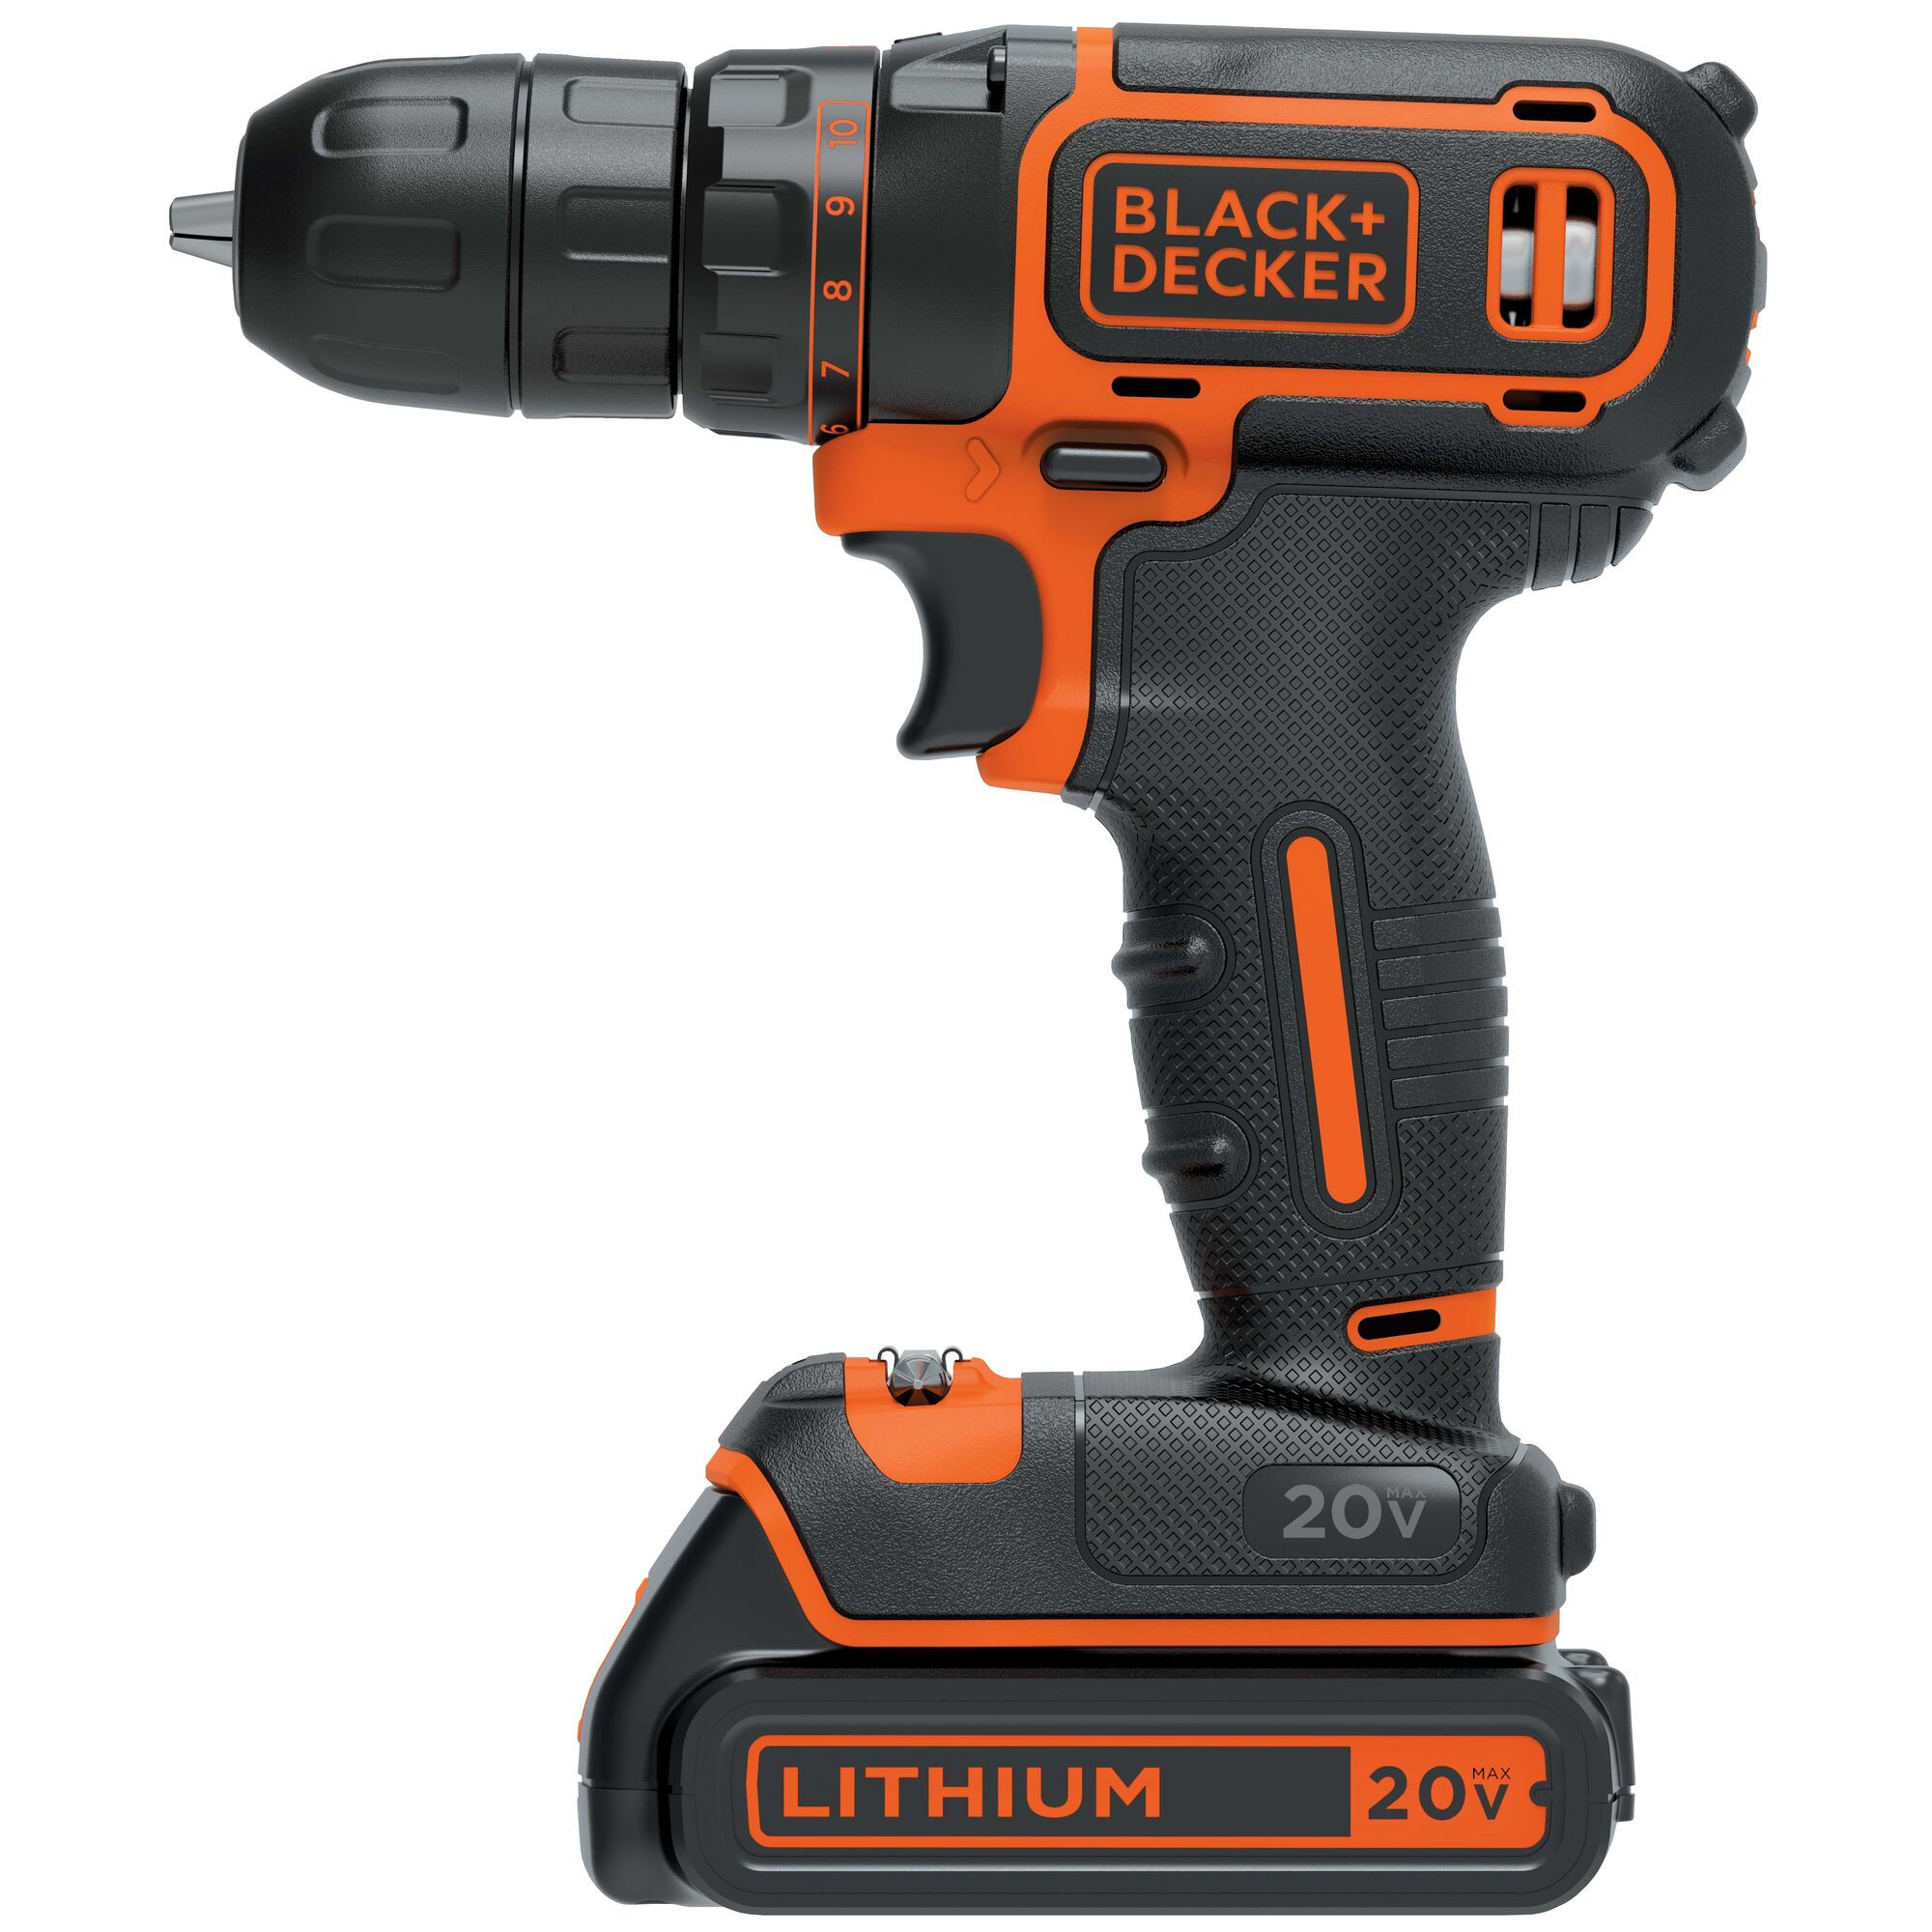 Black and Decker Lithium Drill and Driver.